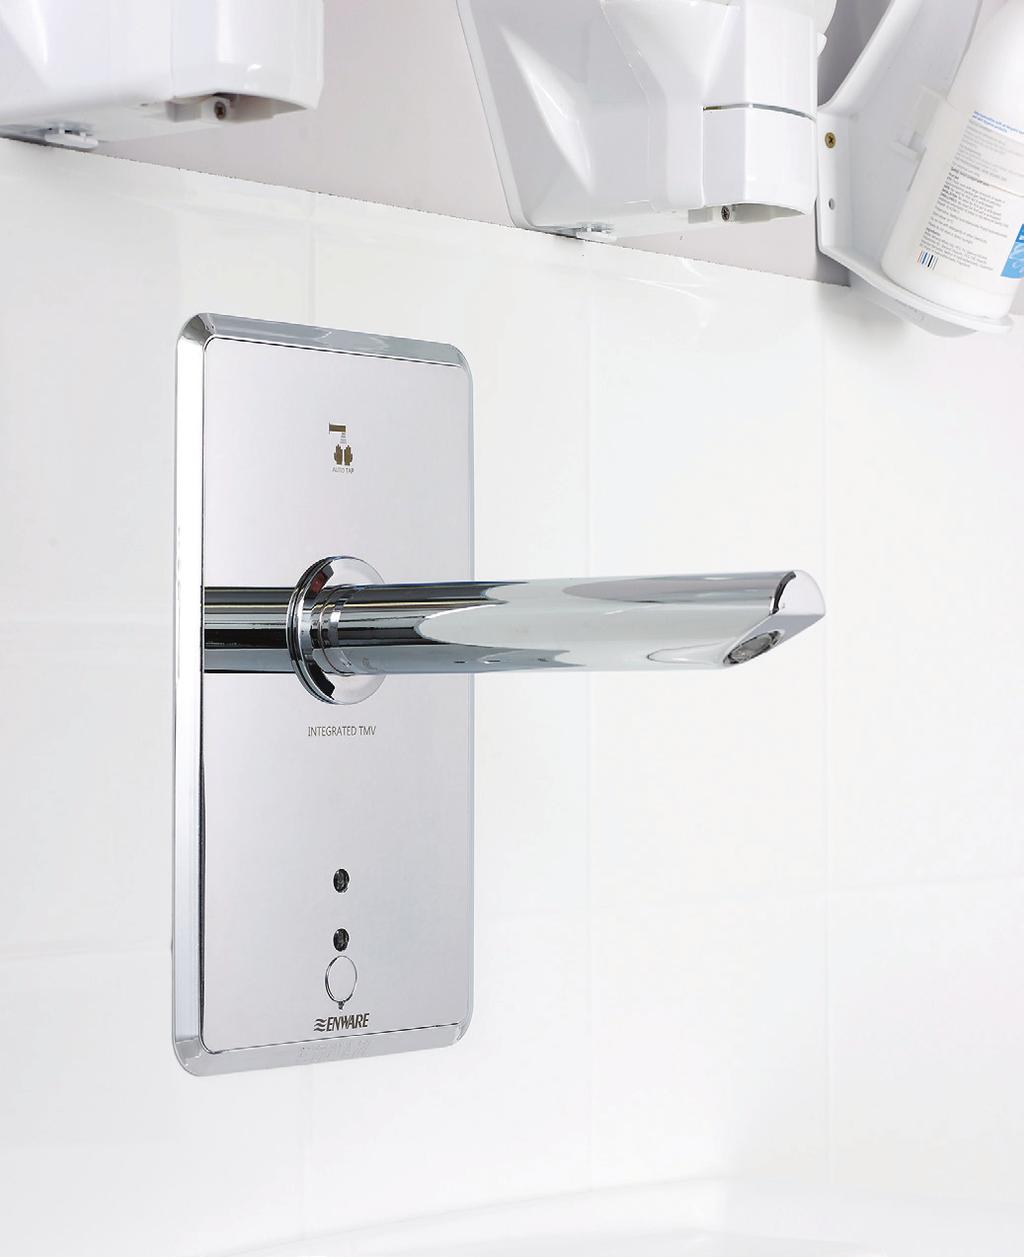 adjustable centres available ATM611 ATM611X ATM610 ATM610X Battery or Mains (via transformer) powered In-wall recess mounting box Chrome plated wall plate and escutcheon with o-rings and seal to